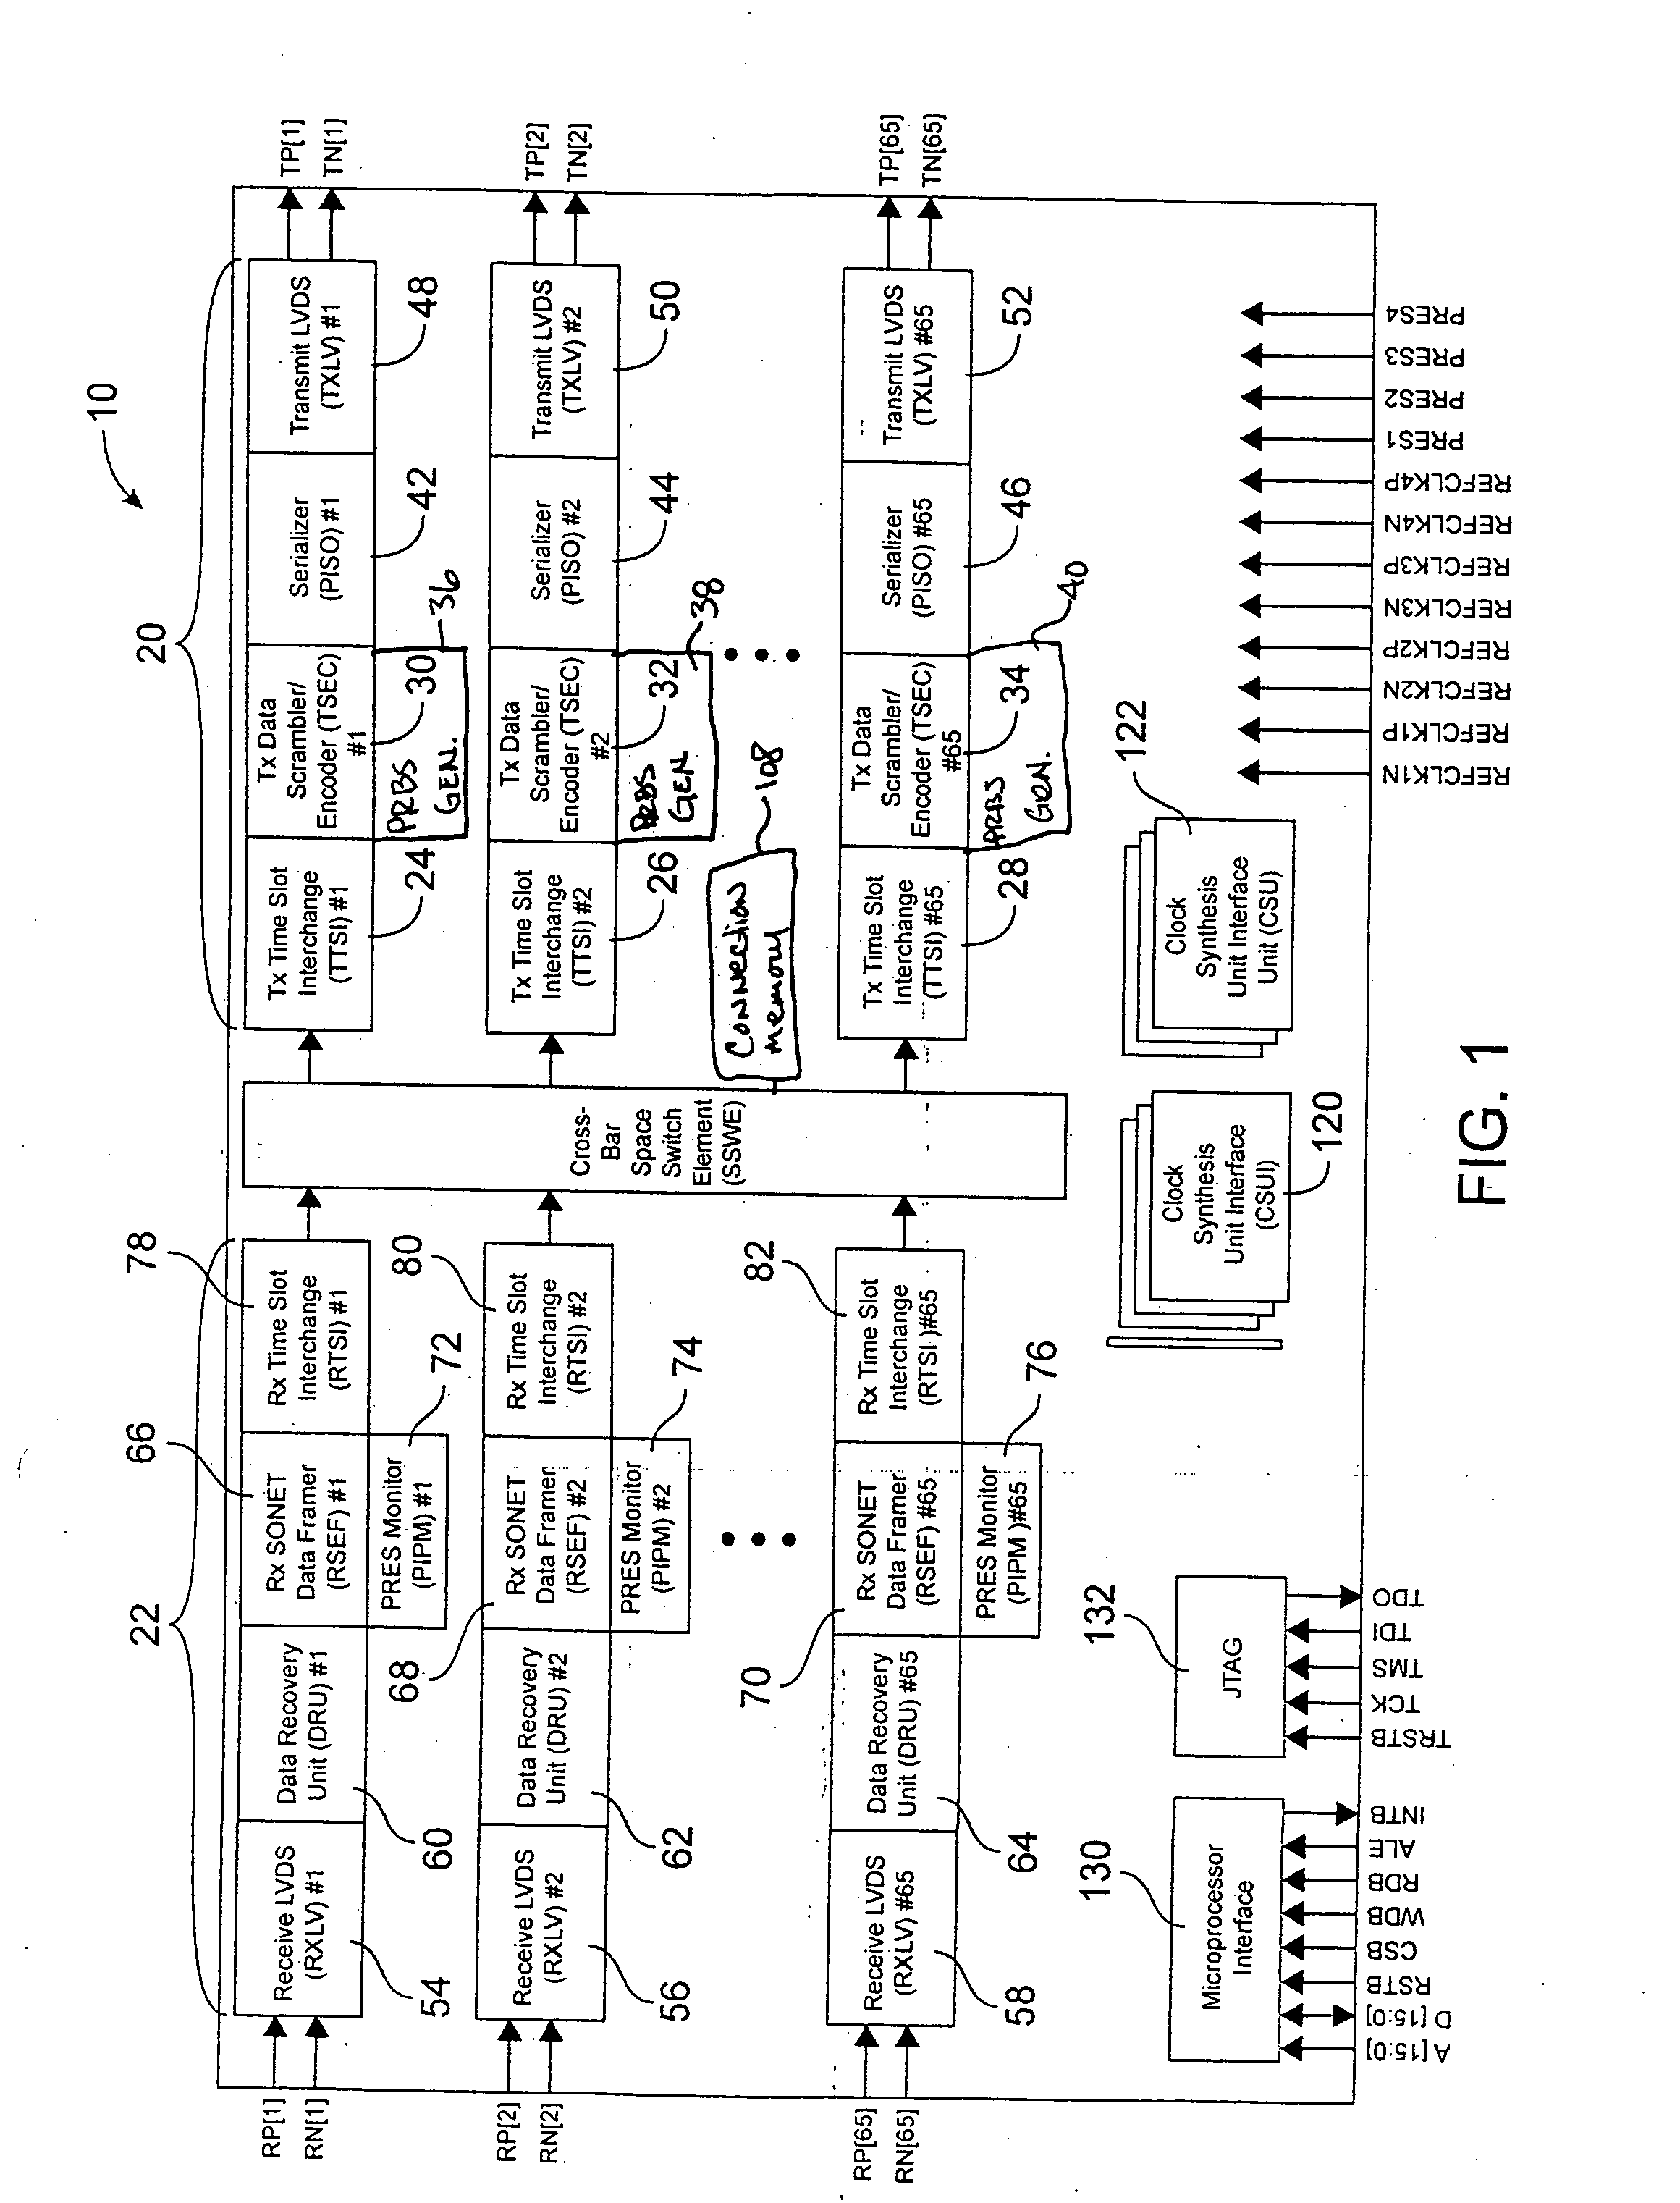 Bus interface for transfer of multiple SONET/SDH rates over a serial backplane